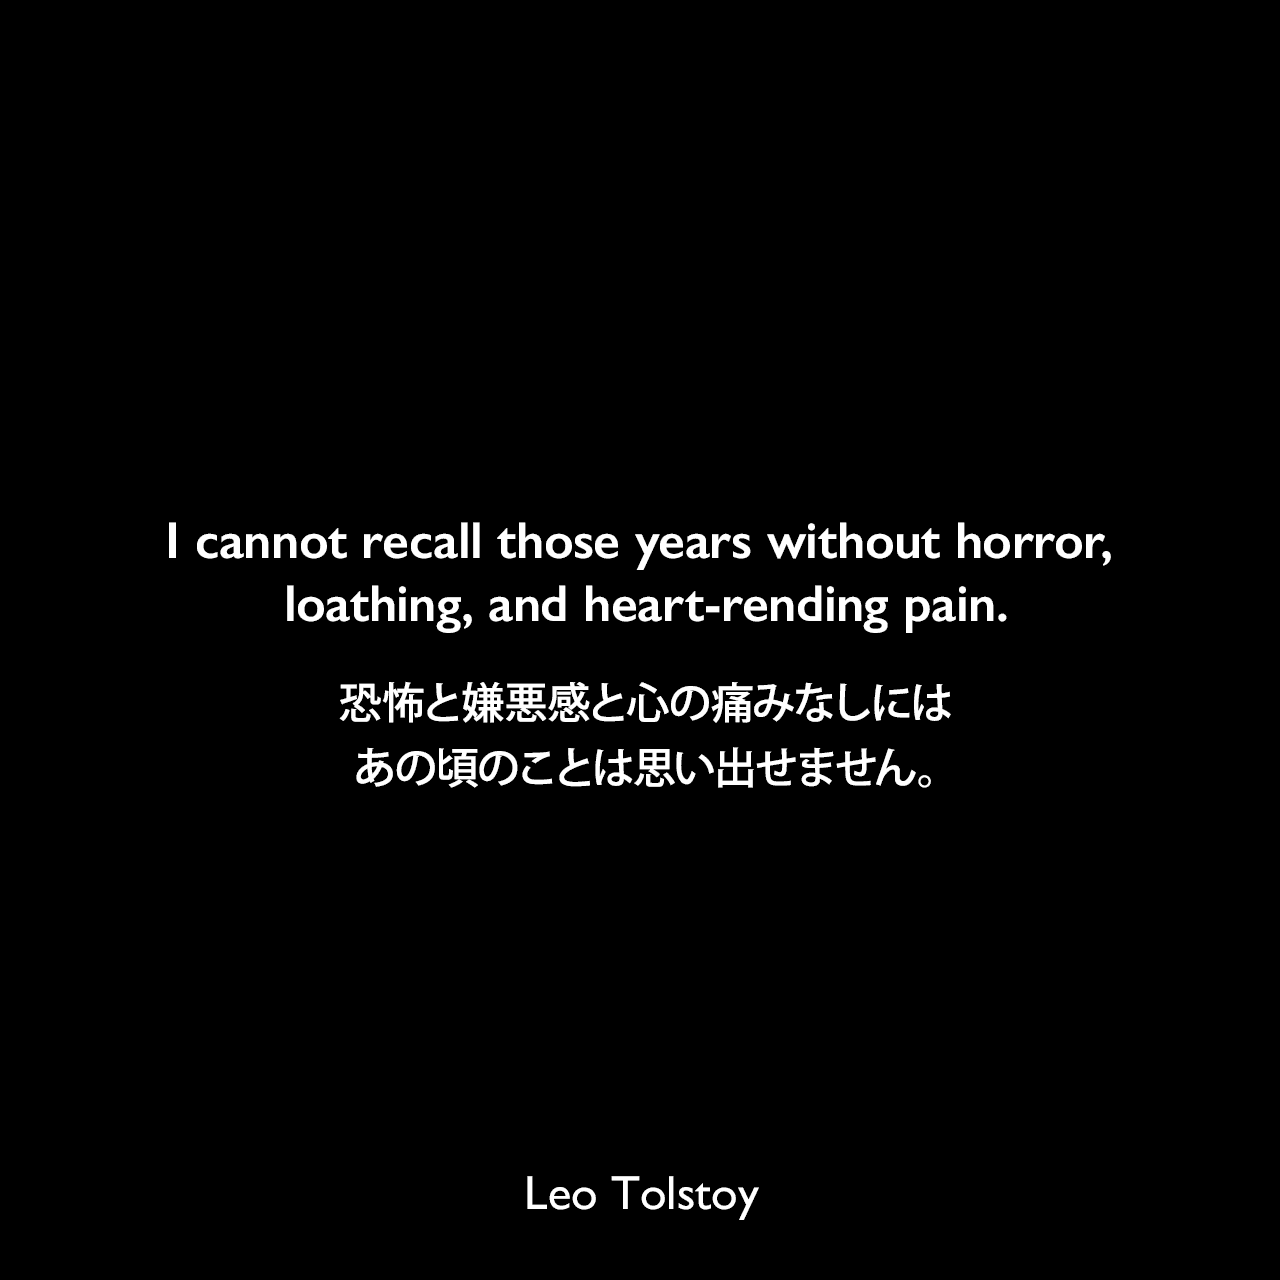 I cannot recall those years without horror, loathing, and heart-rending pain.恐怖と嫌悪感と心の痛みなしには、あの頃のことは思い出せません。- トルストイによる小説「懺悔」よりLeo Tolstoy